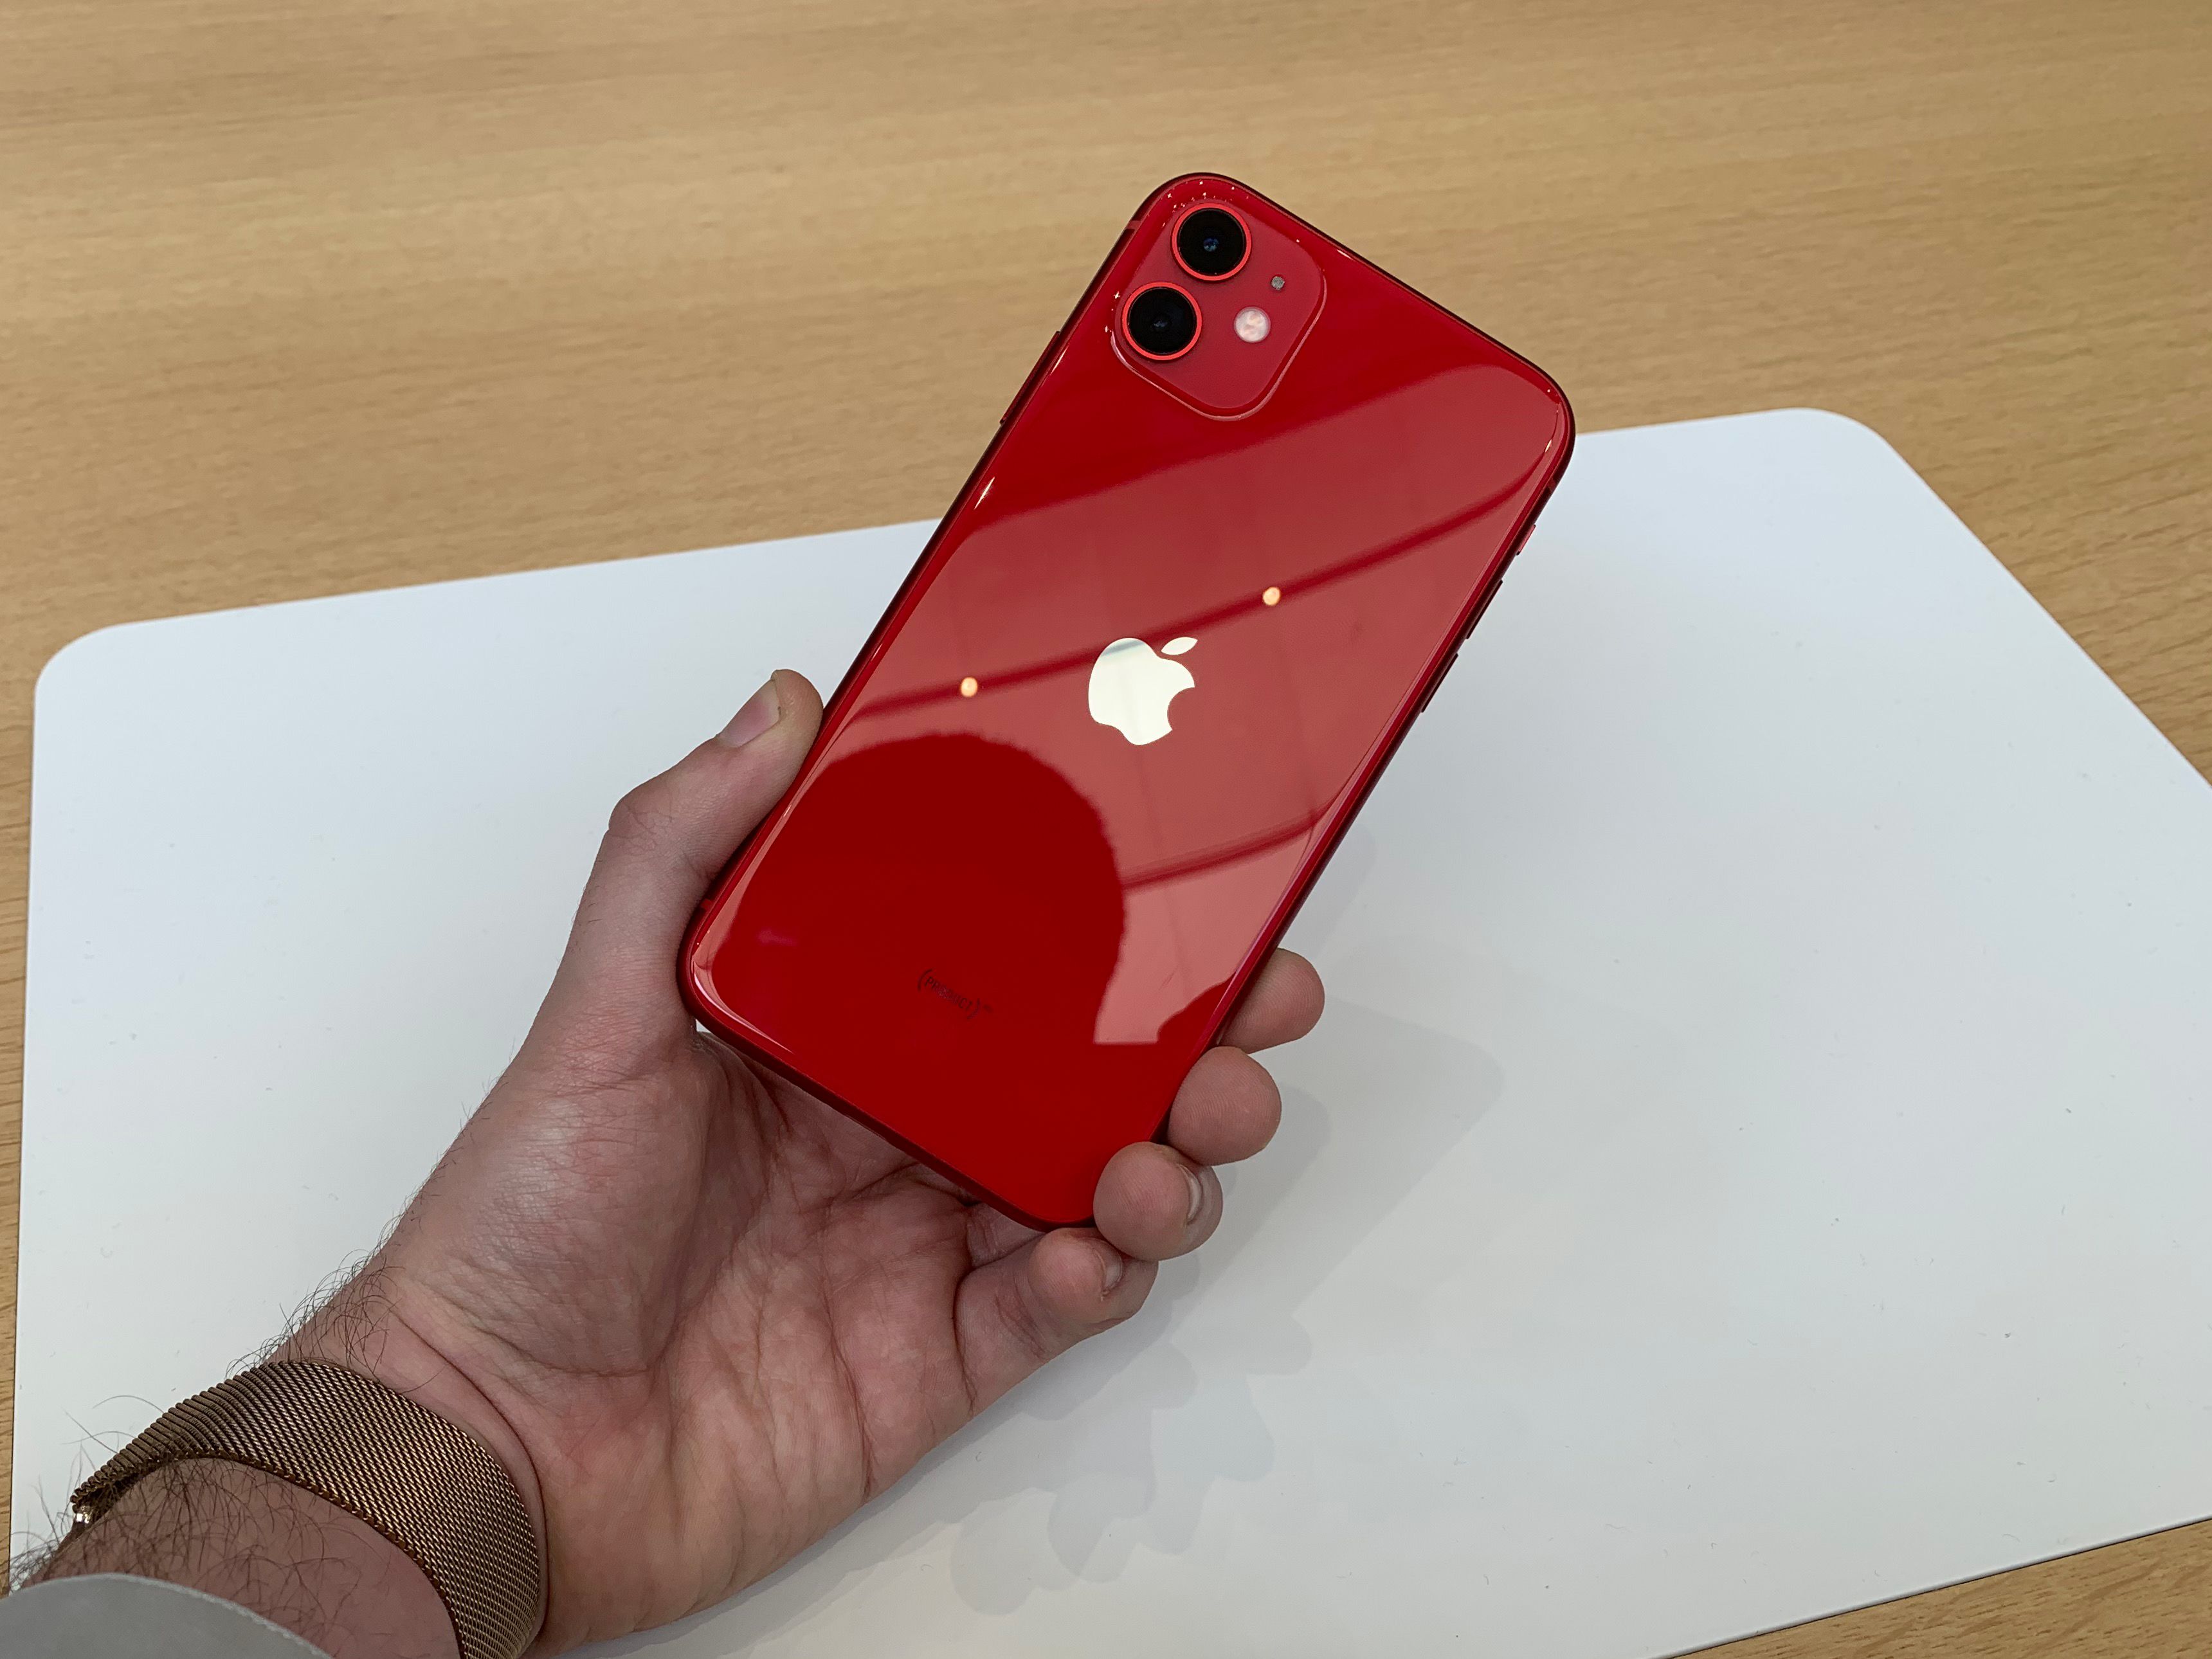 Iphone 11 Hands On Seems Like Big Value For 699 Cnn